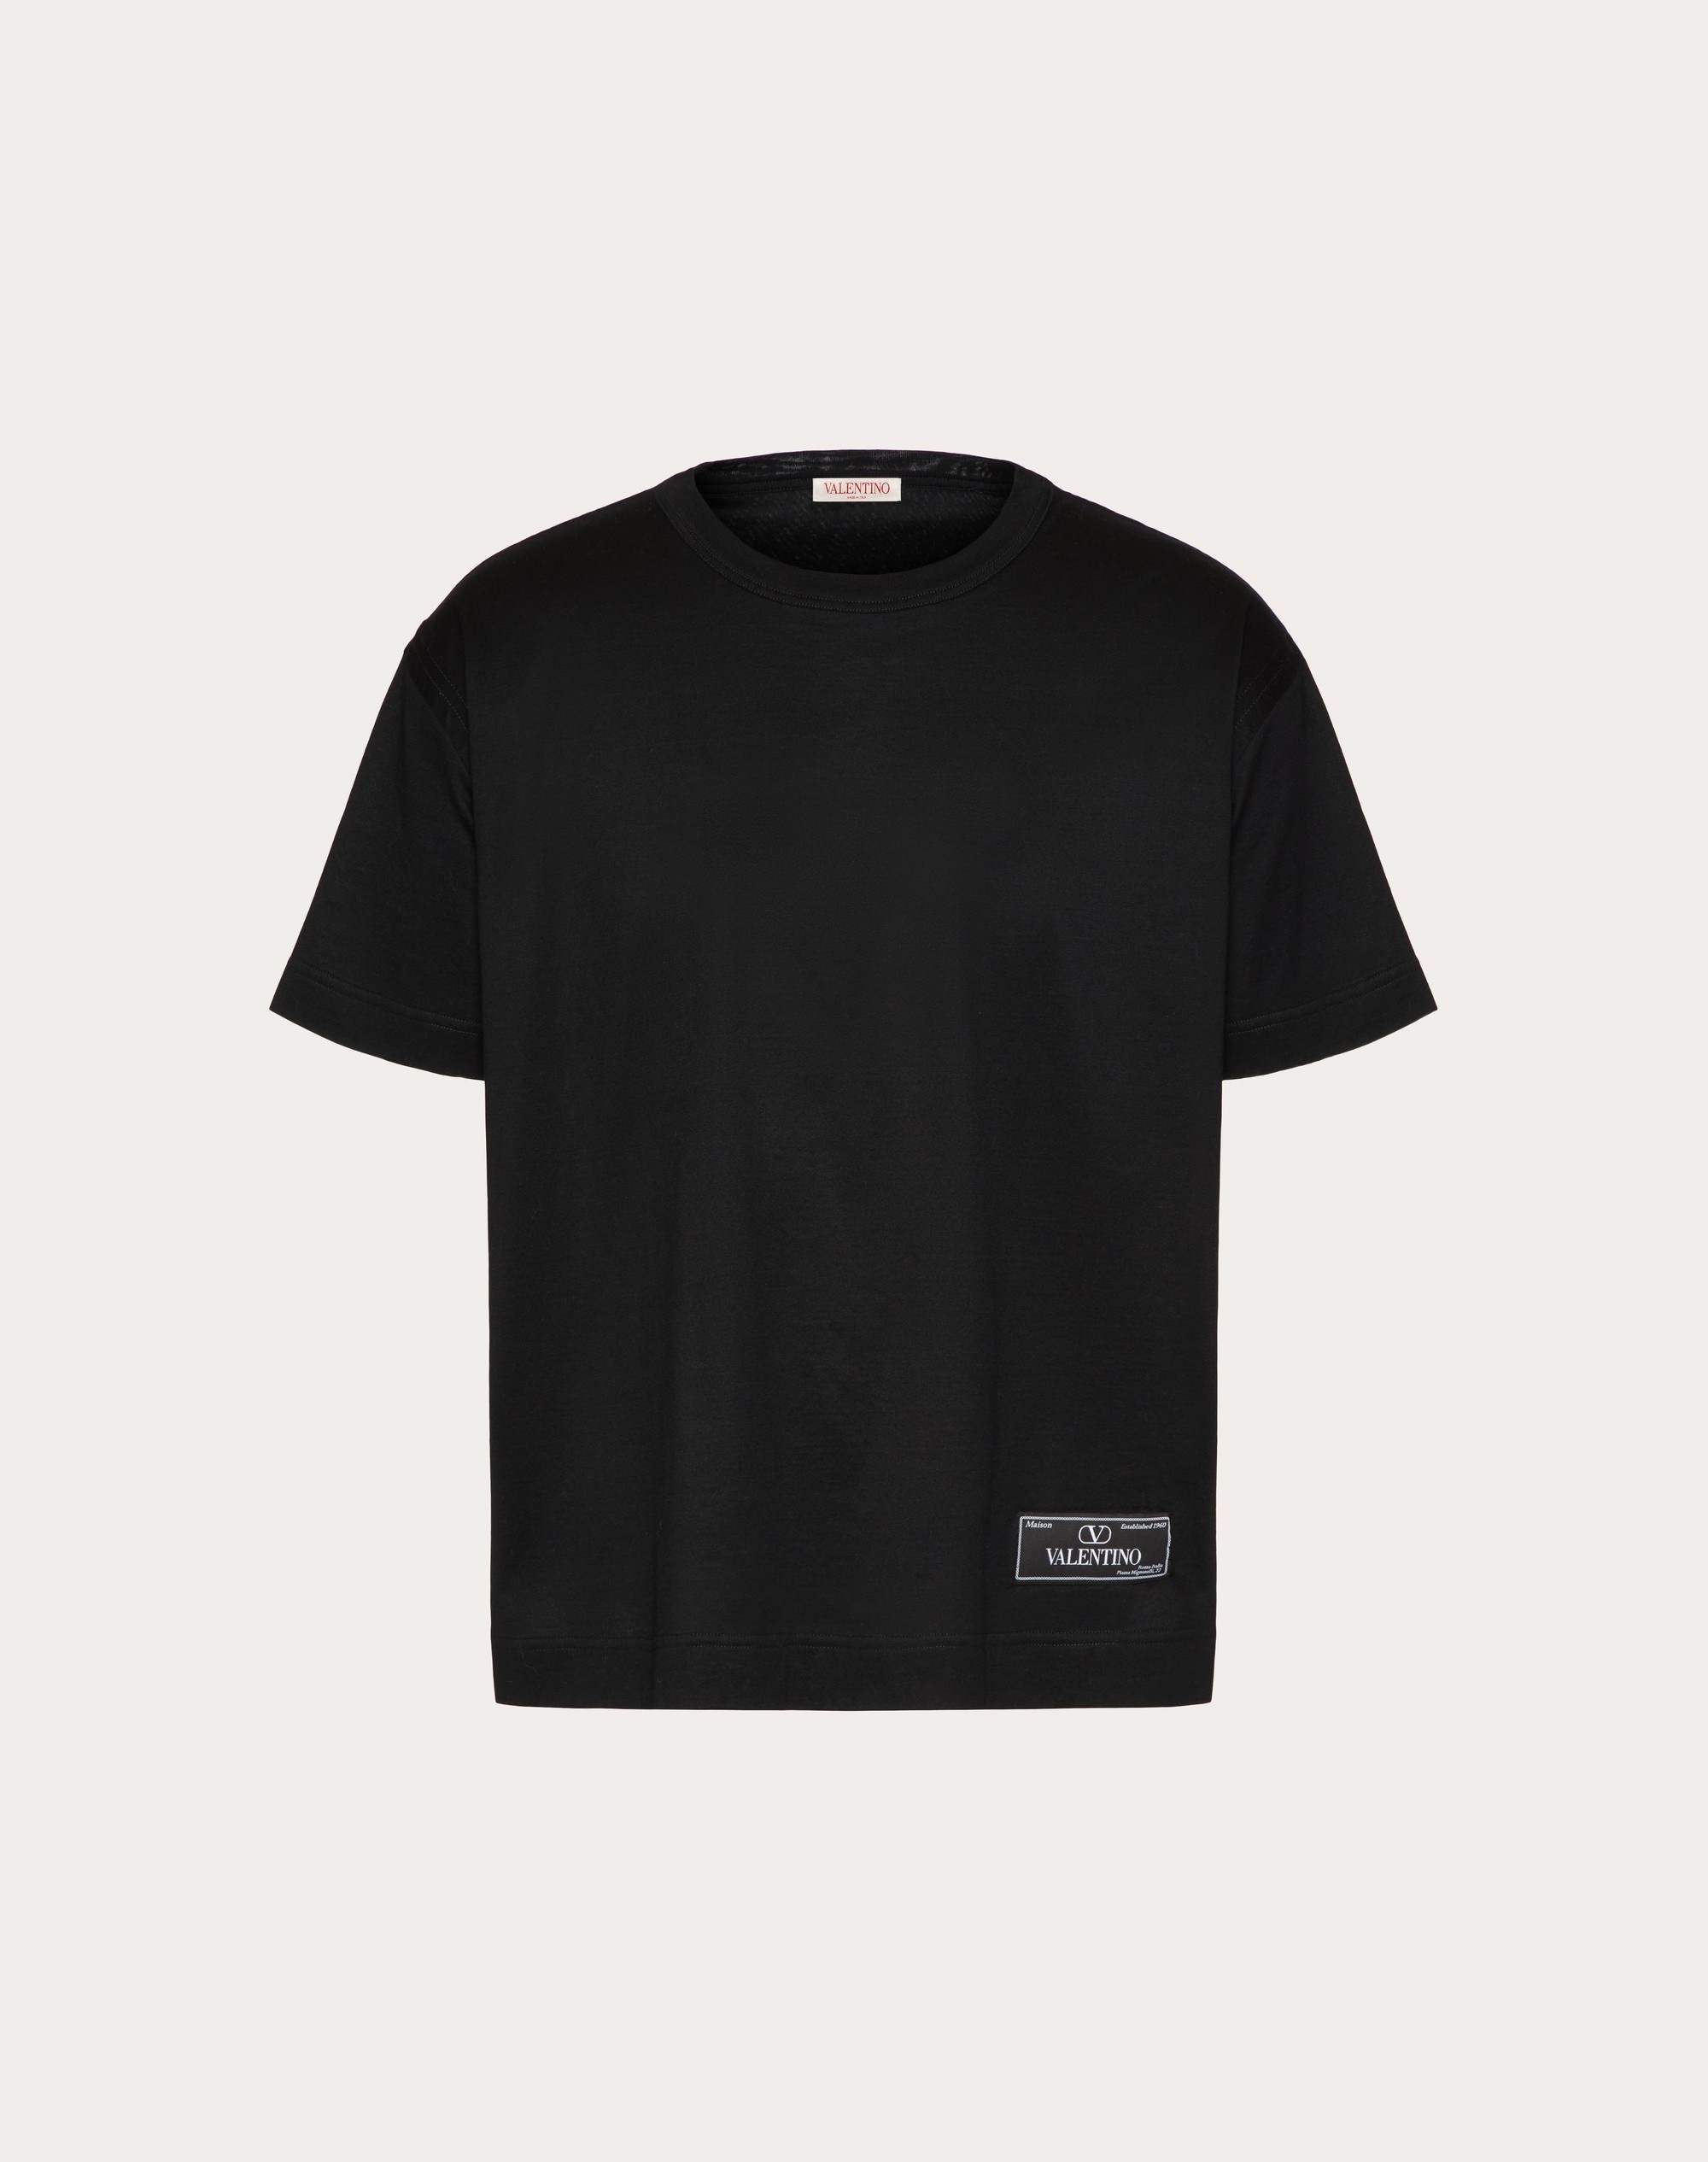 COTTON T-SHIRT WITH MAISON VALENTINO TAILORING LABEL - 1